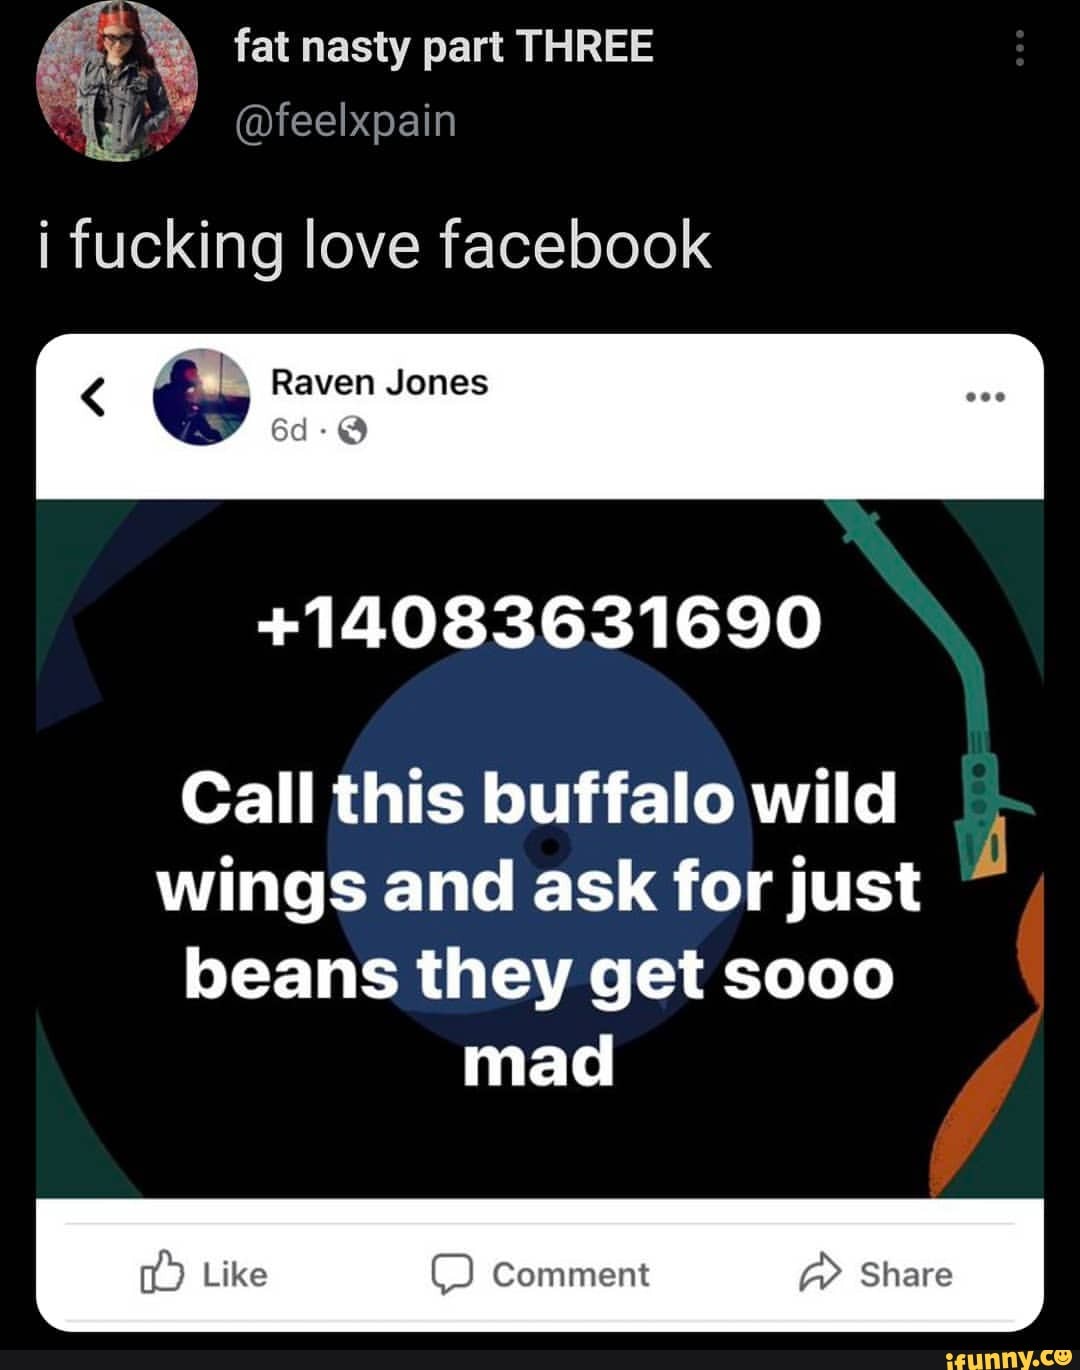 Selskab kalligraf erstatte Fat nasty part THREE @feelxpain i fucking love facebook < Raven Jones  +14083631690 Call this buffalo wild wings and ask for just beans they get  sooo mad Like Comment Share - )